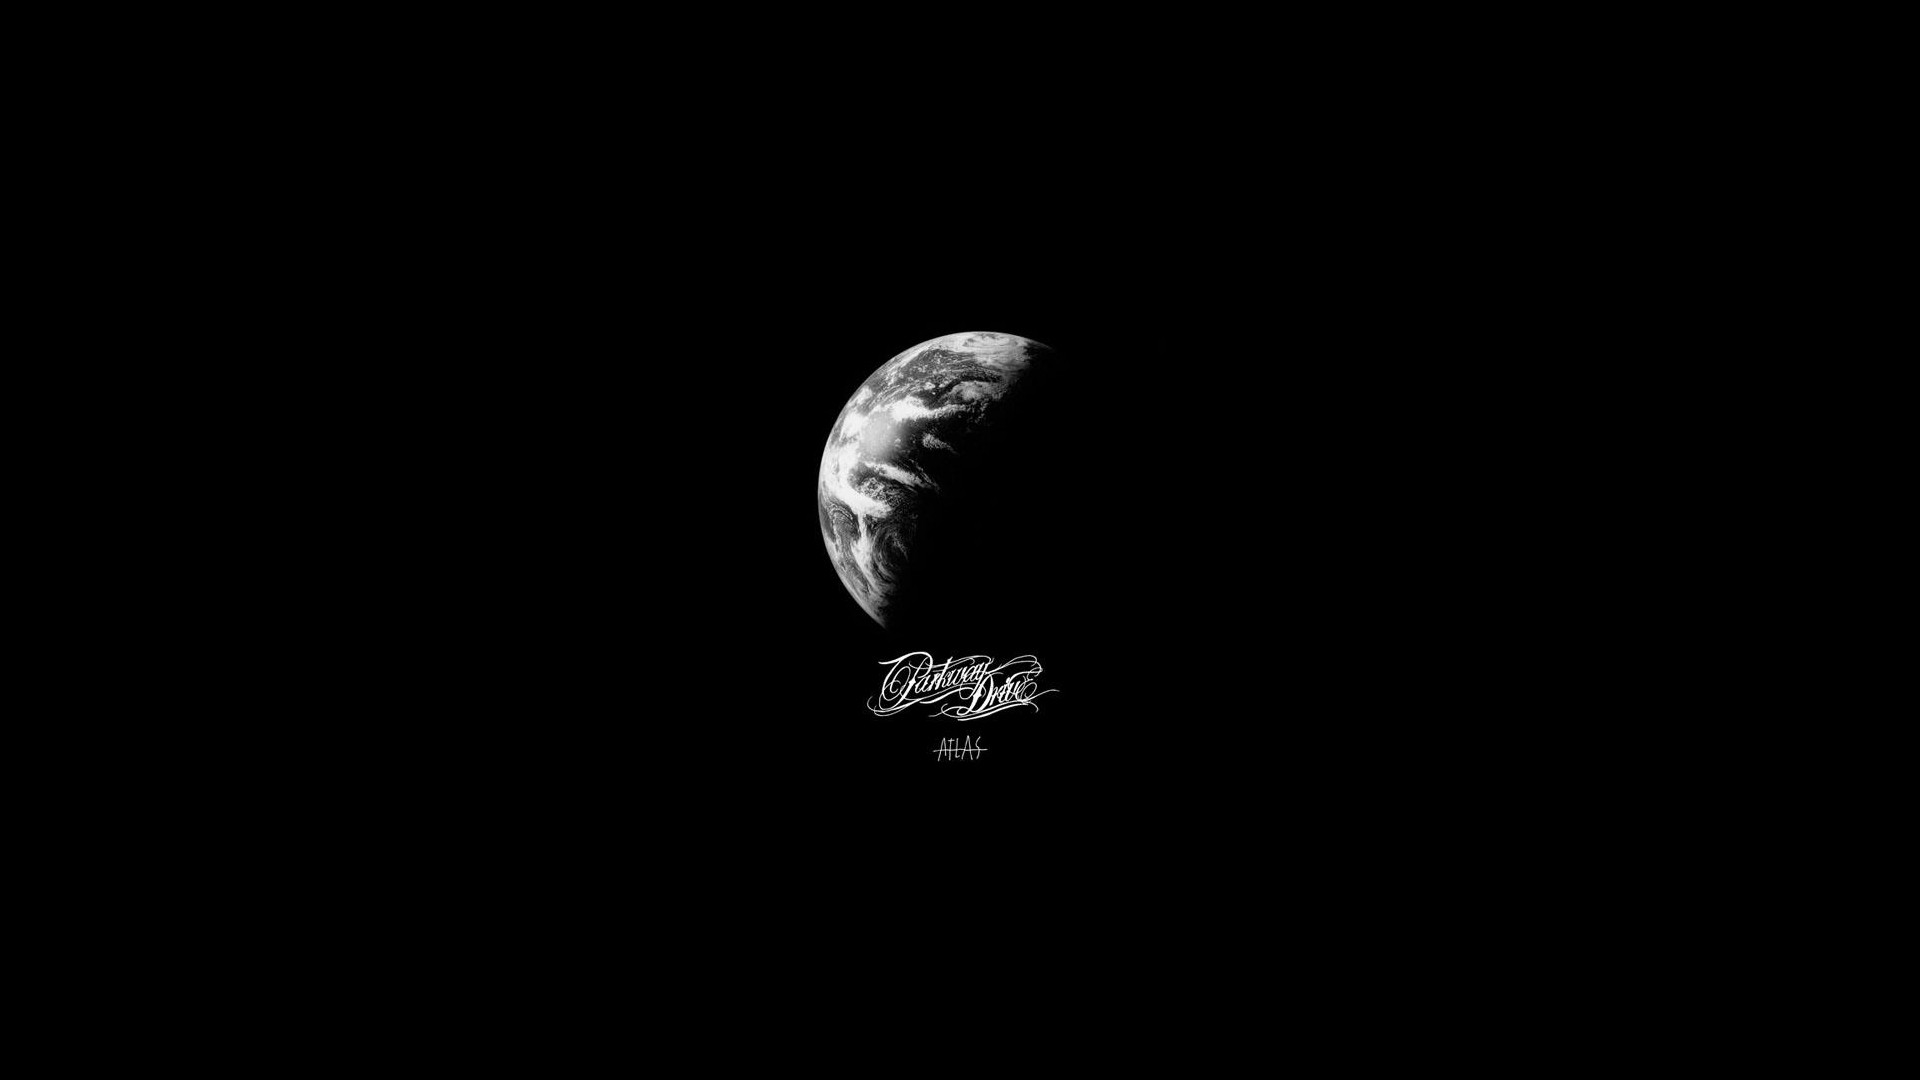 General 1920x1080 Parkway  Drive metal music minimalism planet simple background space monochrome black background typography